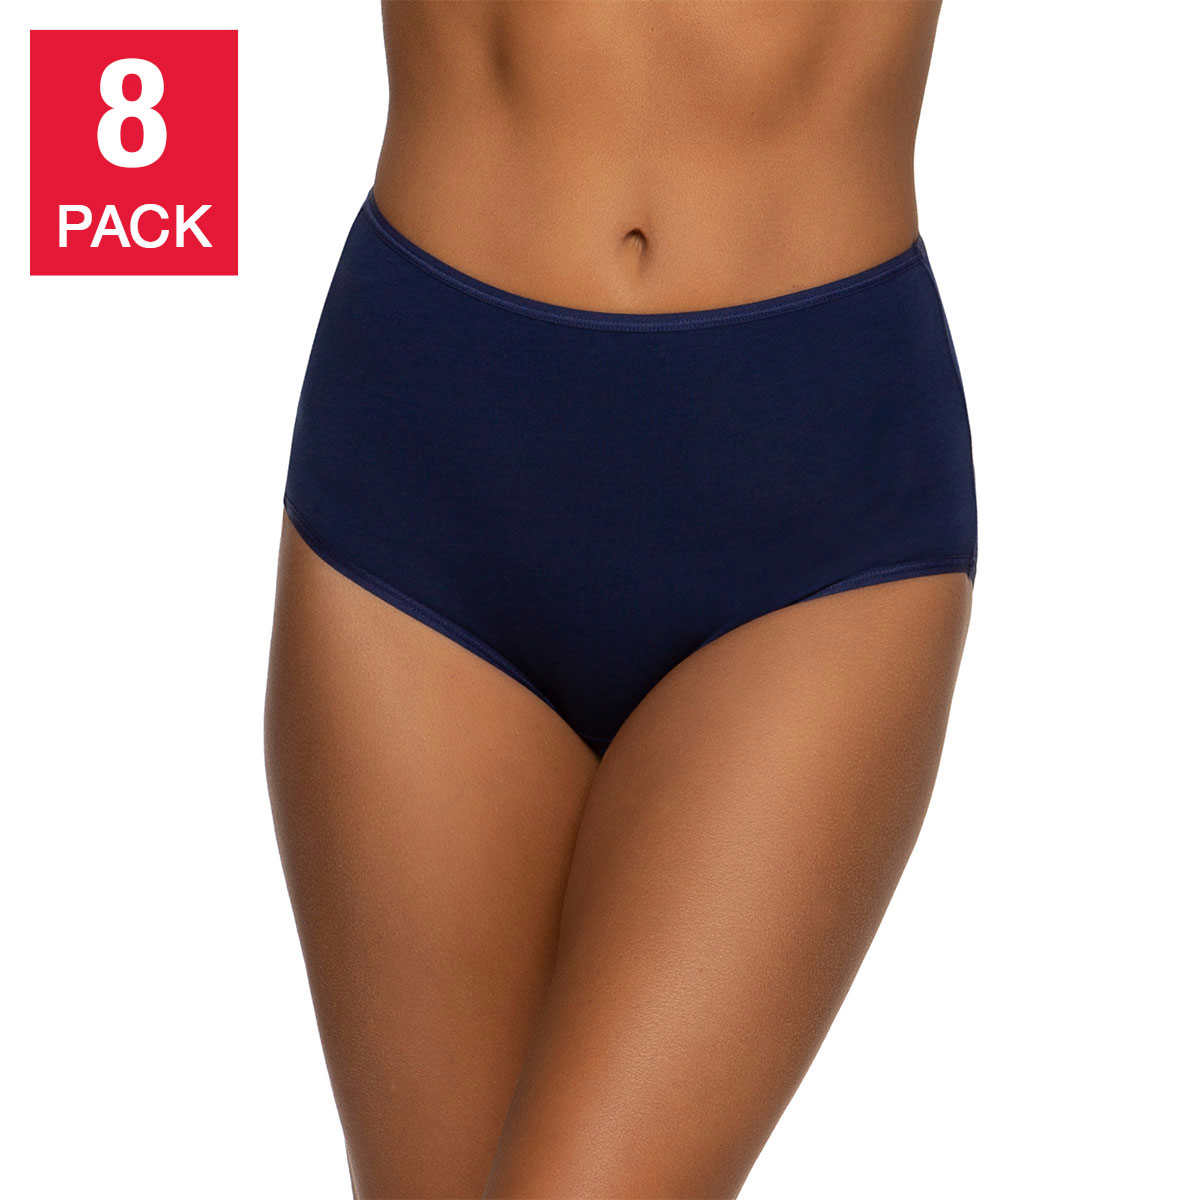 Felina, Lingerie Womens Cotton Stretch Hi-Cut Full Coverage size Small - 8  Pack (Purple), Size : S